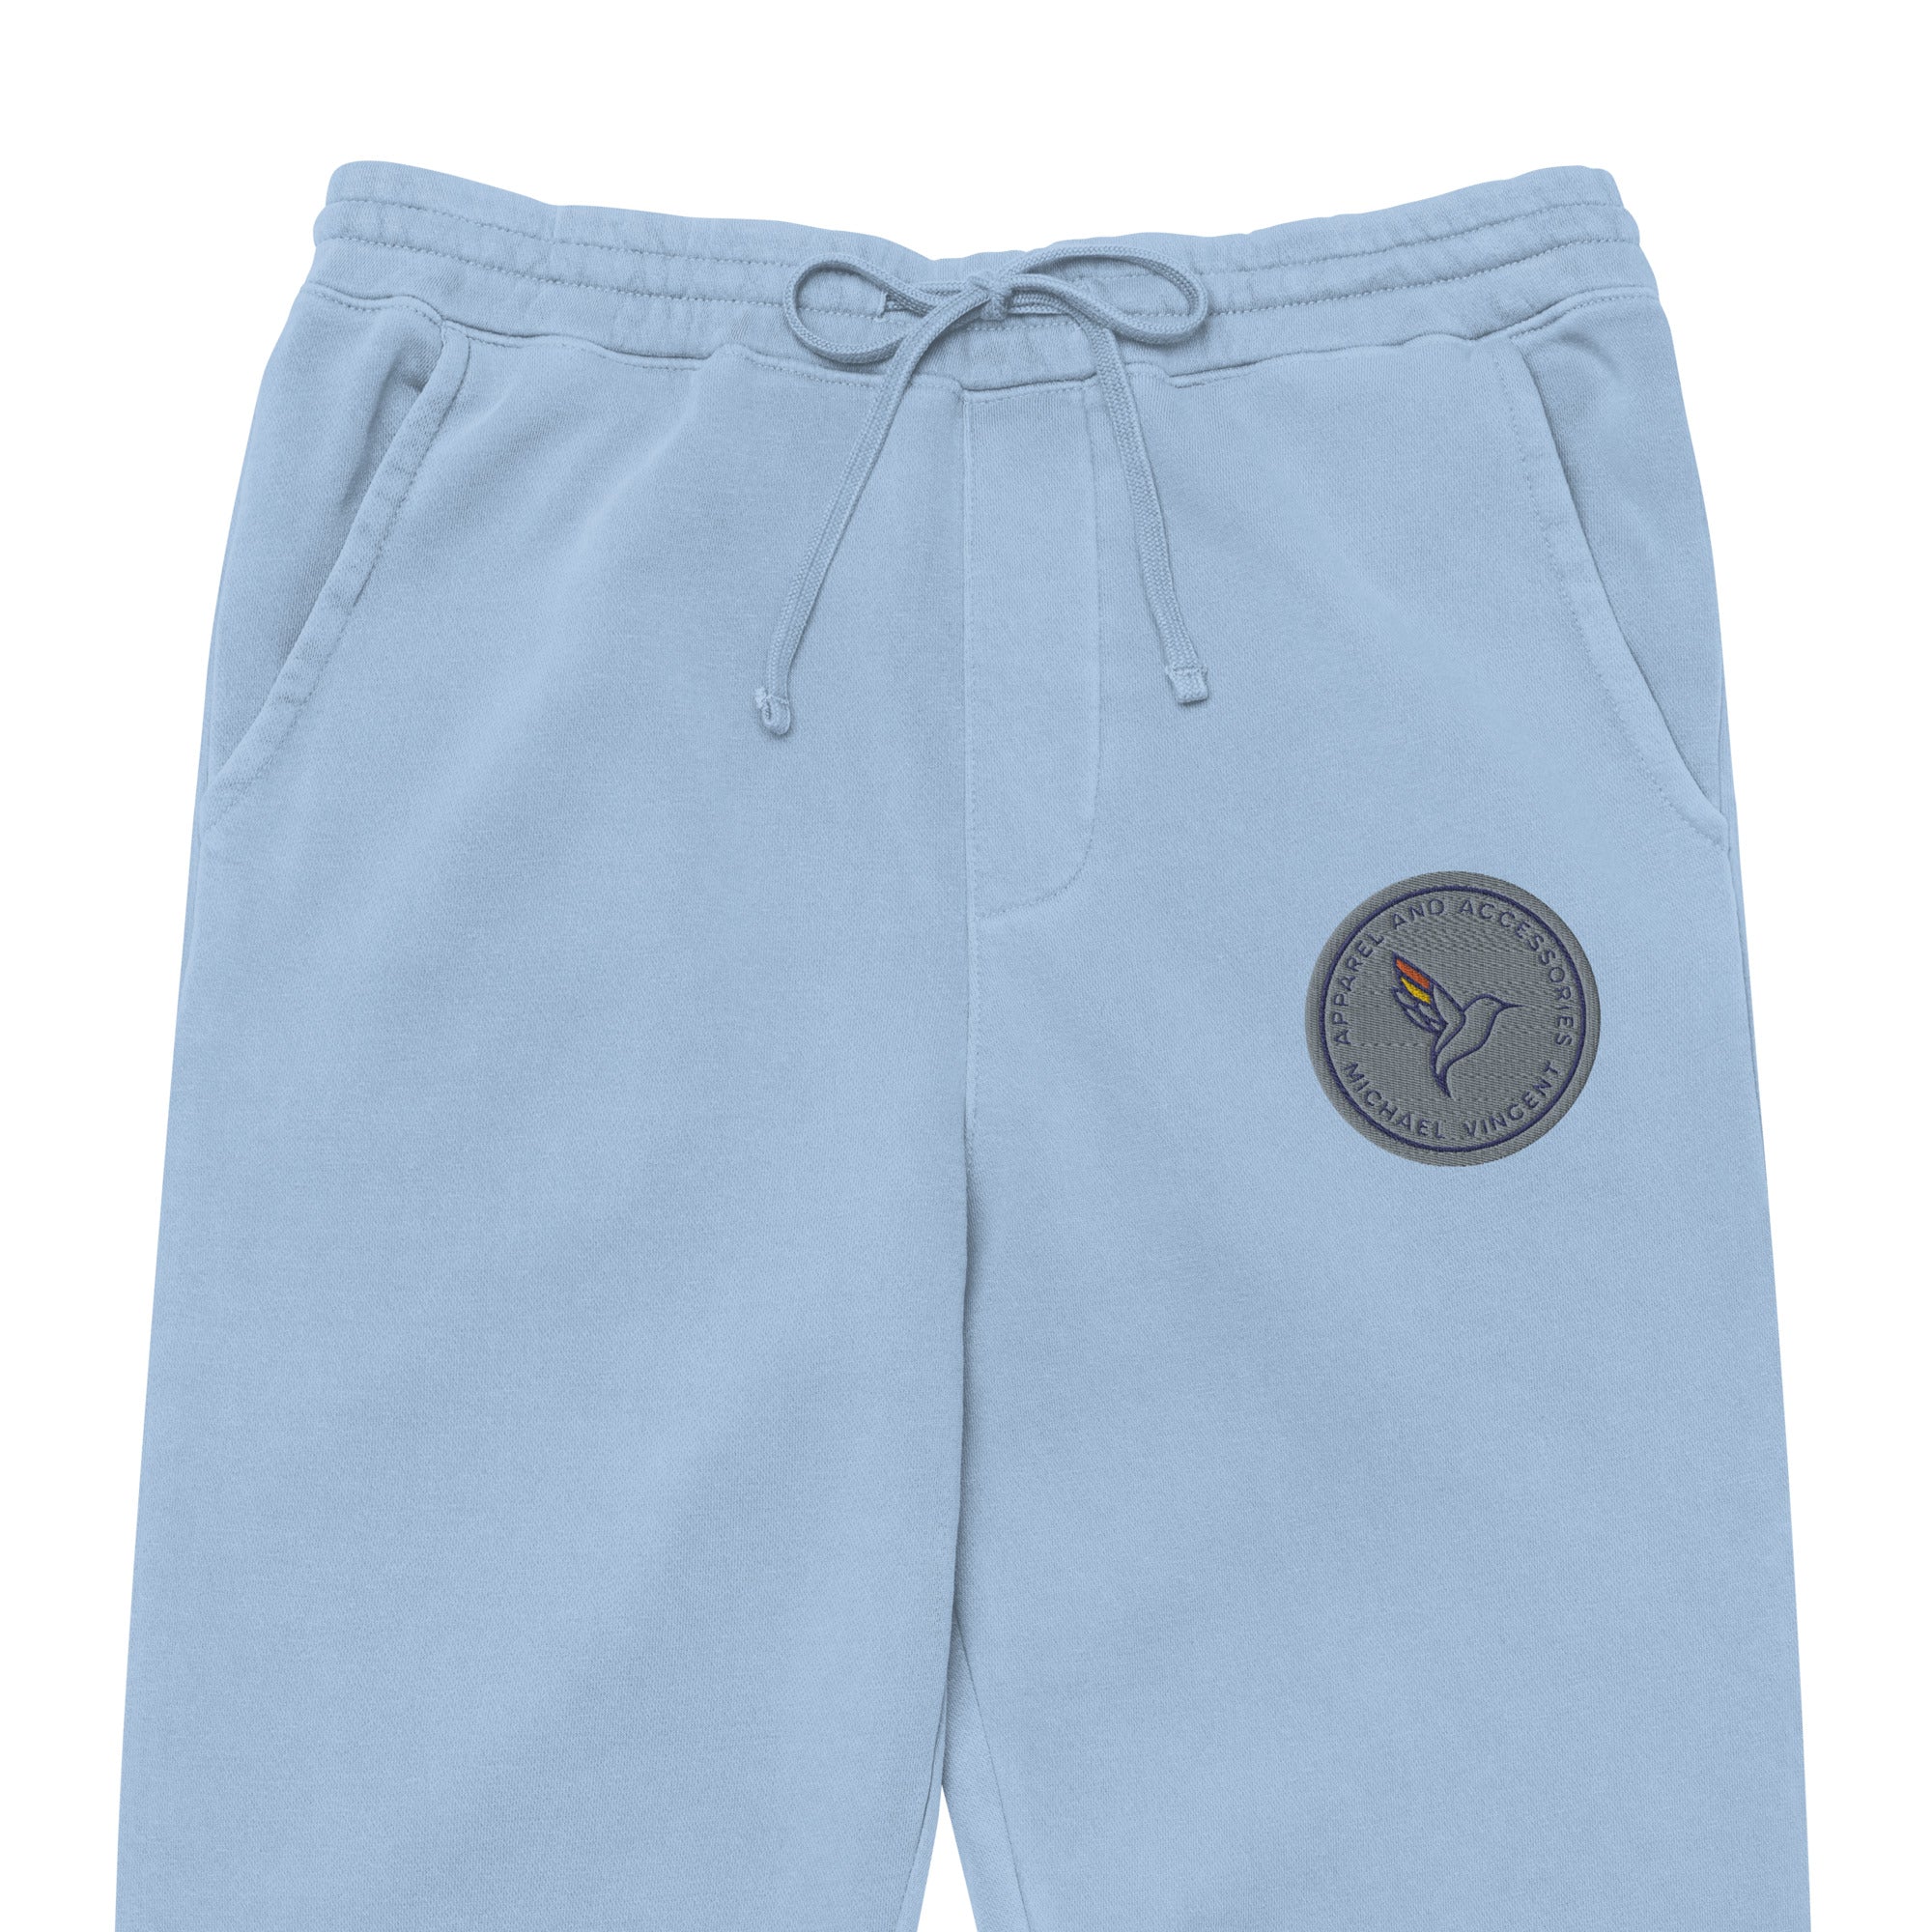 unisex-pigment-dyed-sweatpants-pigment-light-blue-zoomed-in-631ff68b45eb3.jpg